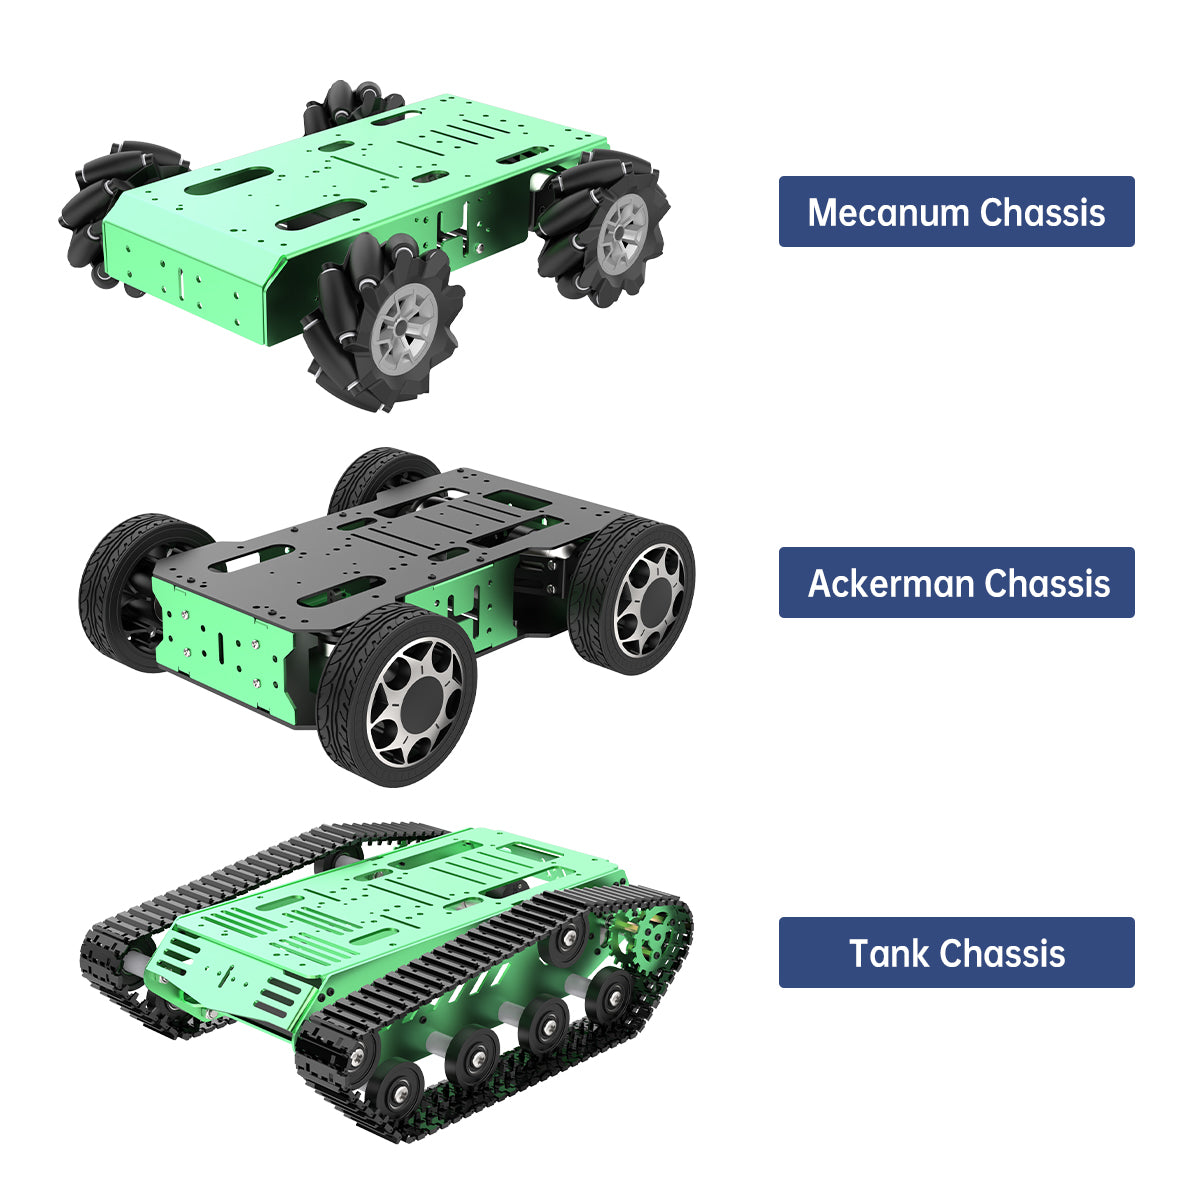 JetRover ROS Robot Car with Vision Robotic Arm Powered by Jetson Nano Support SLAM Mapping/ Navigation/ Python